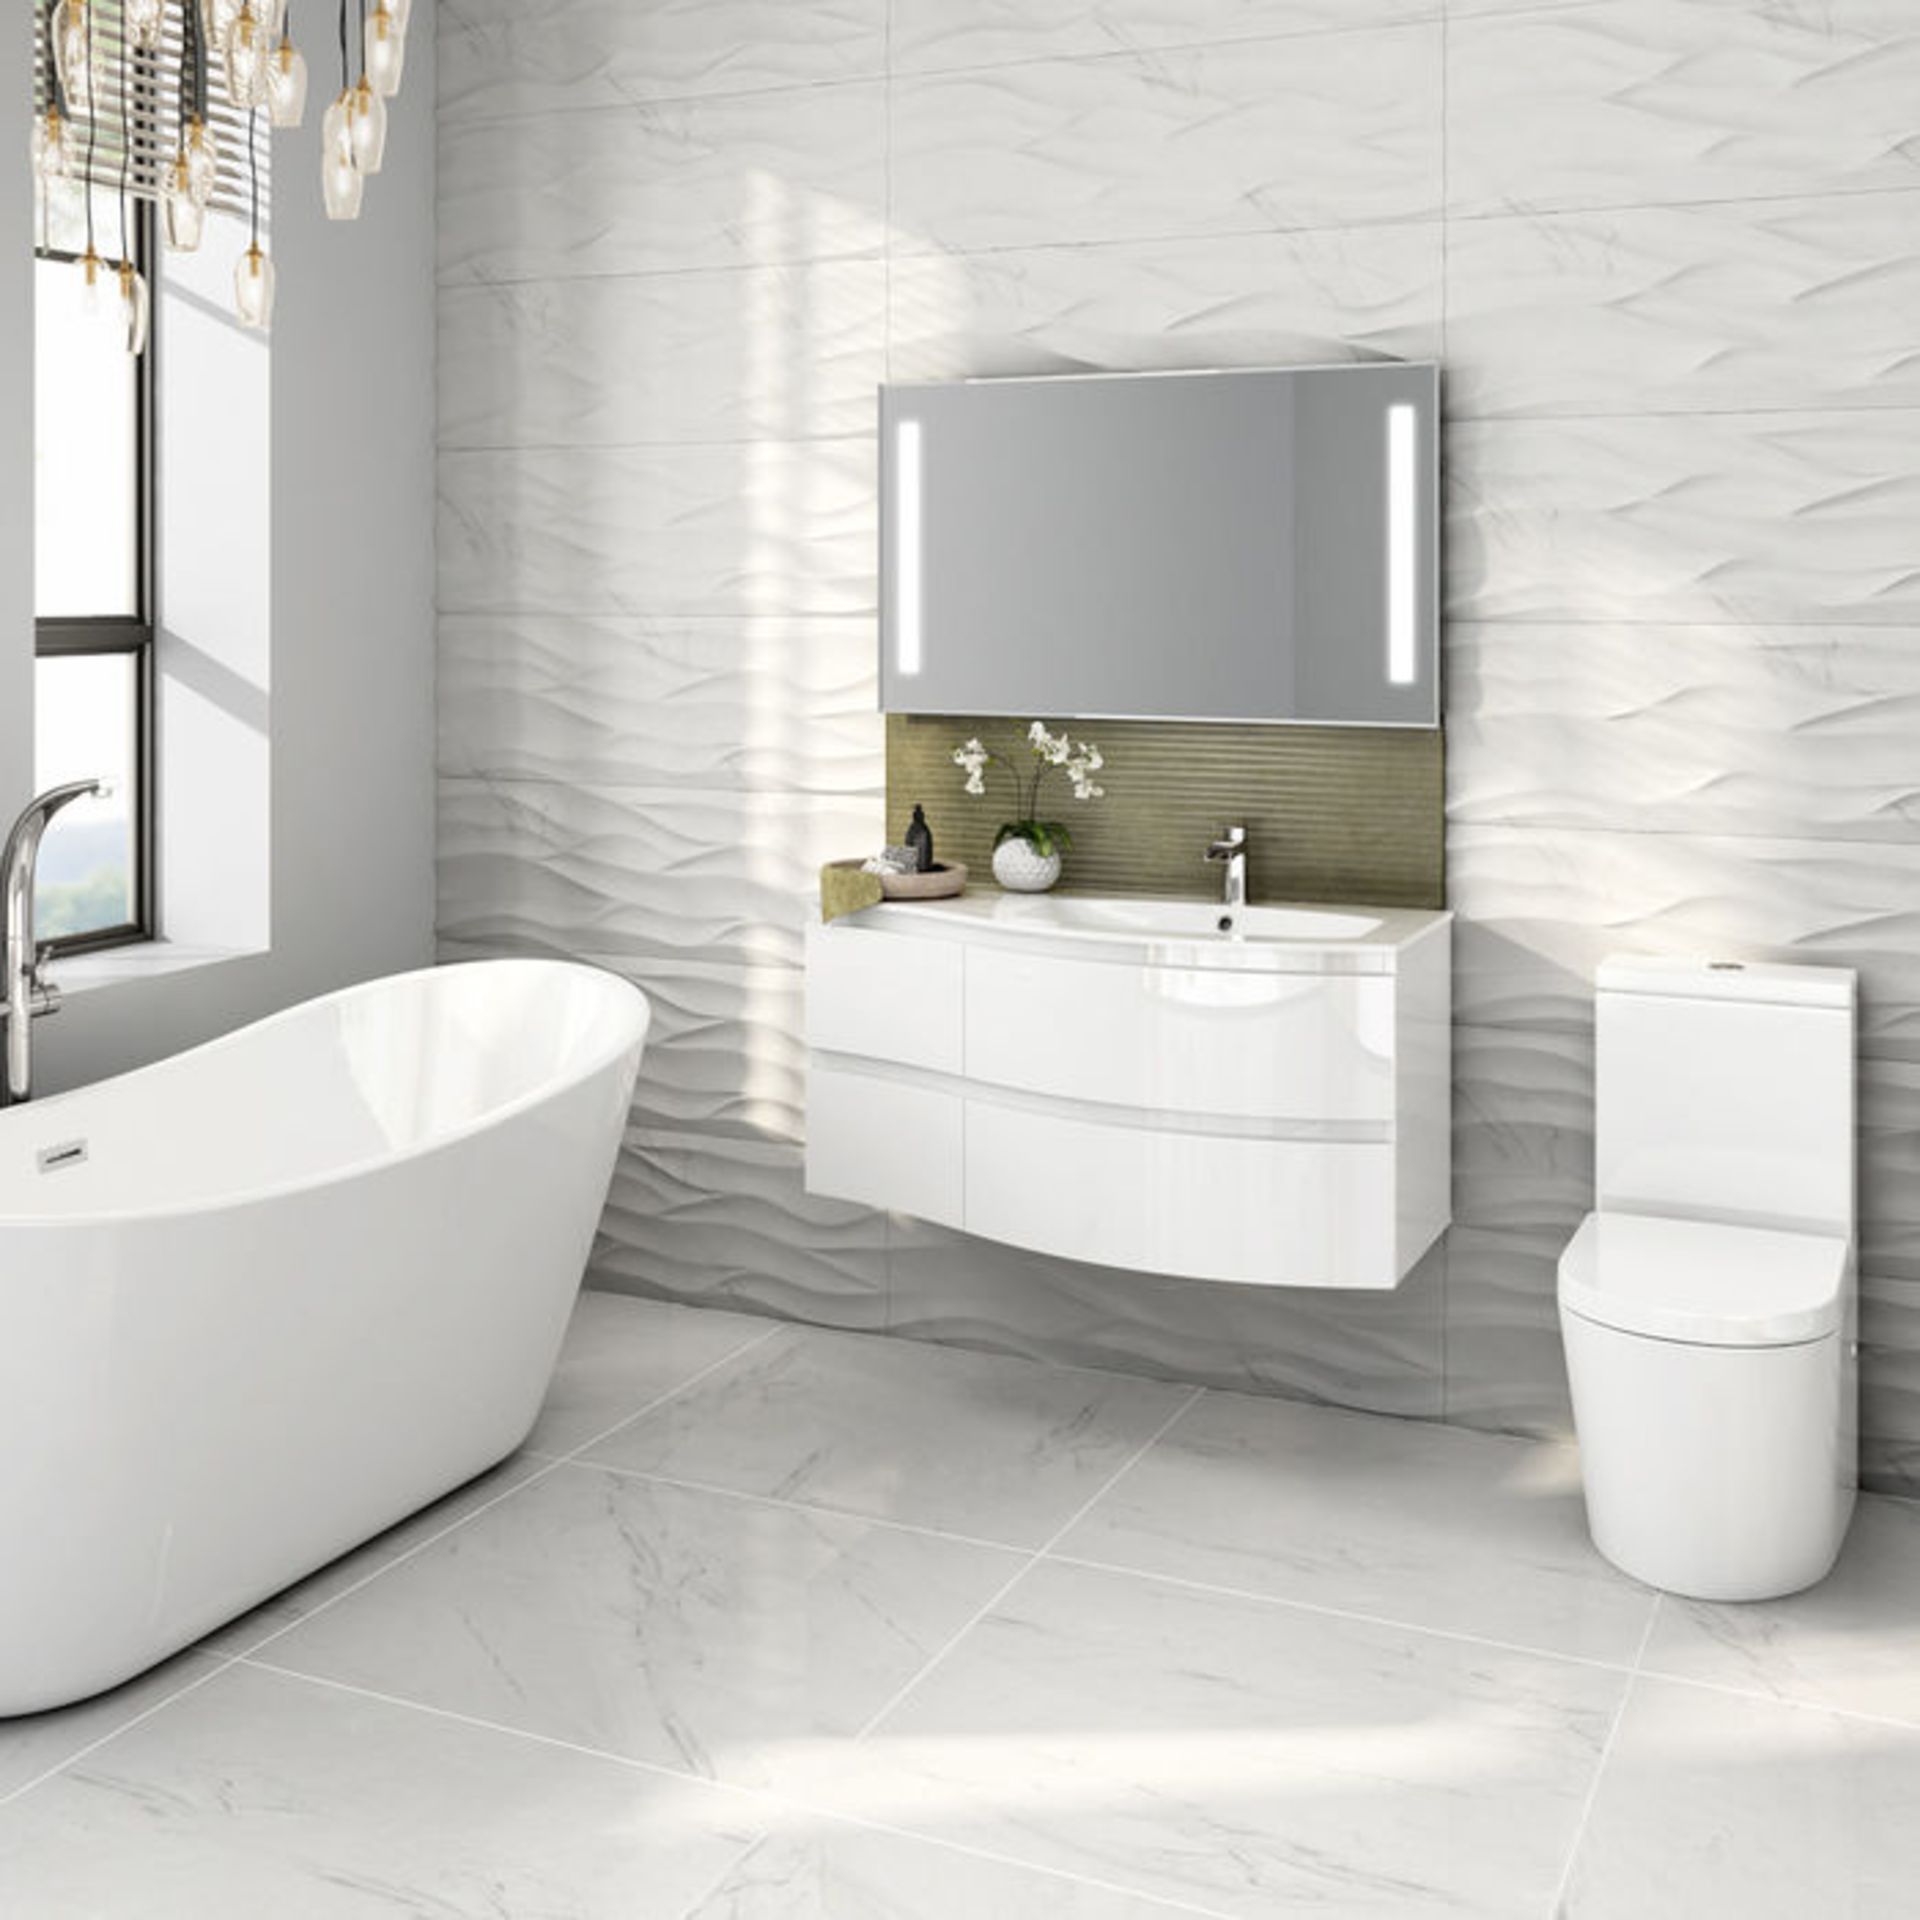 NEW & BOXED 1040mm Amelie High Gloss White Curved Vanity Unit - Right Hand - Wall Hung. RRP £1,499. - Image 2 of 3